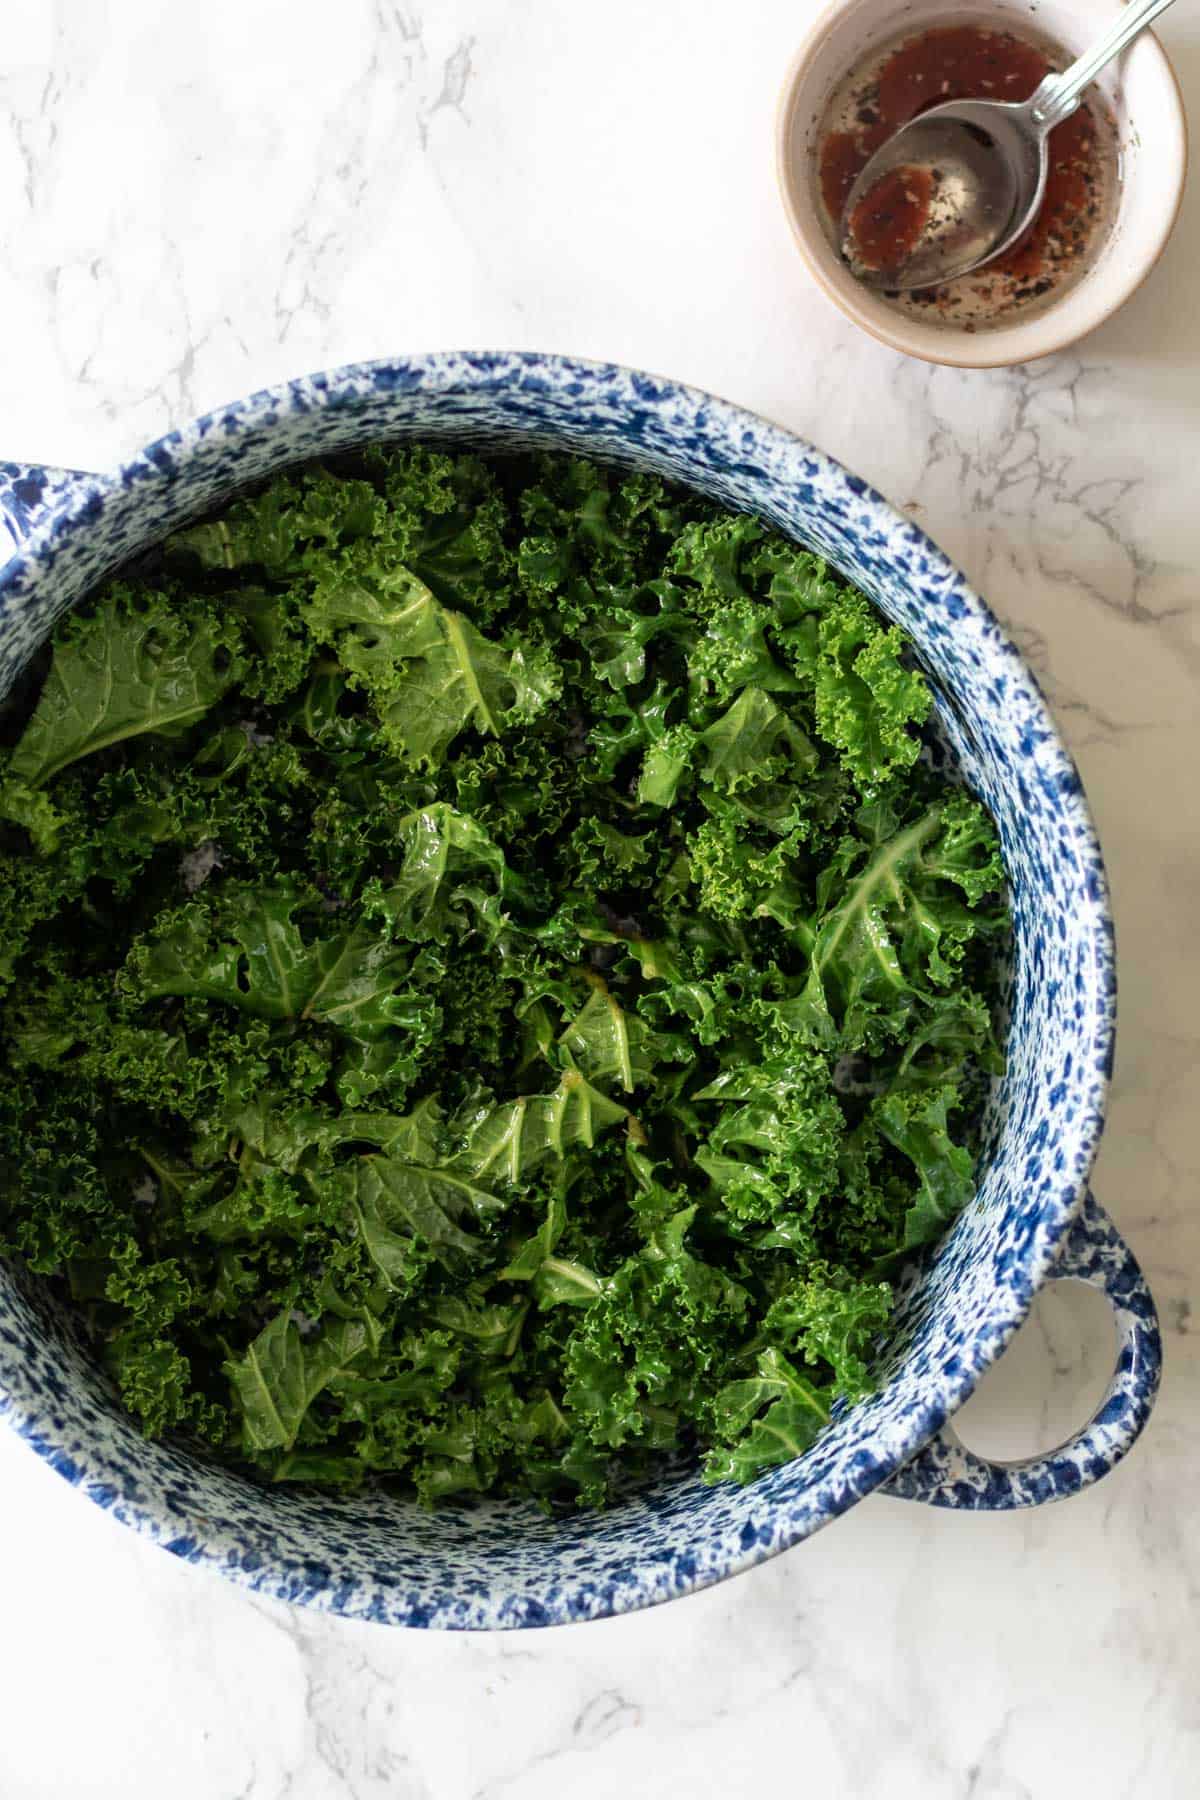 massaged kale in a bowl next to some salad dressing